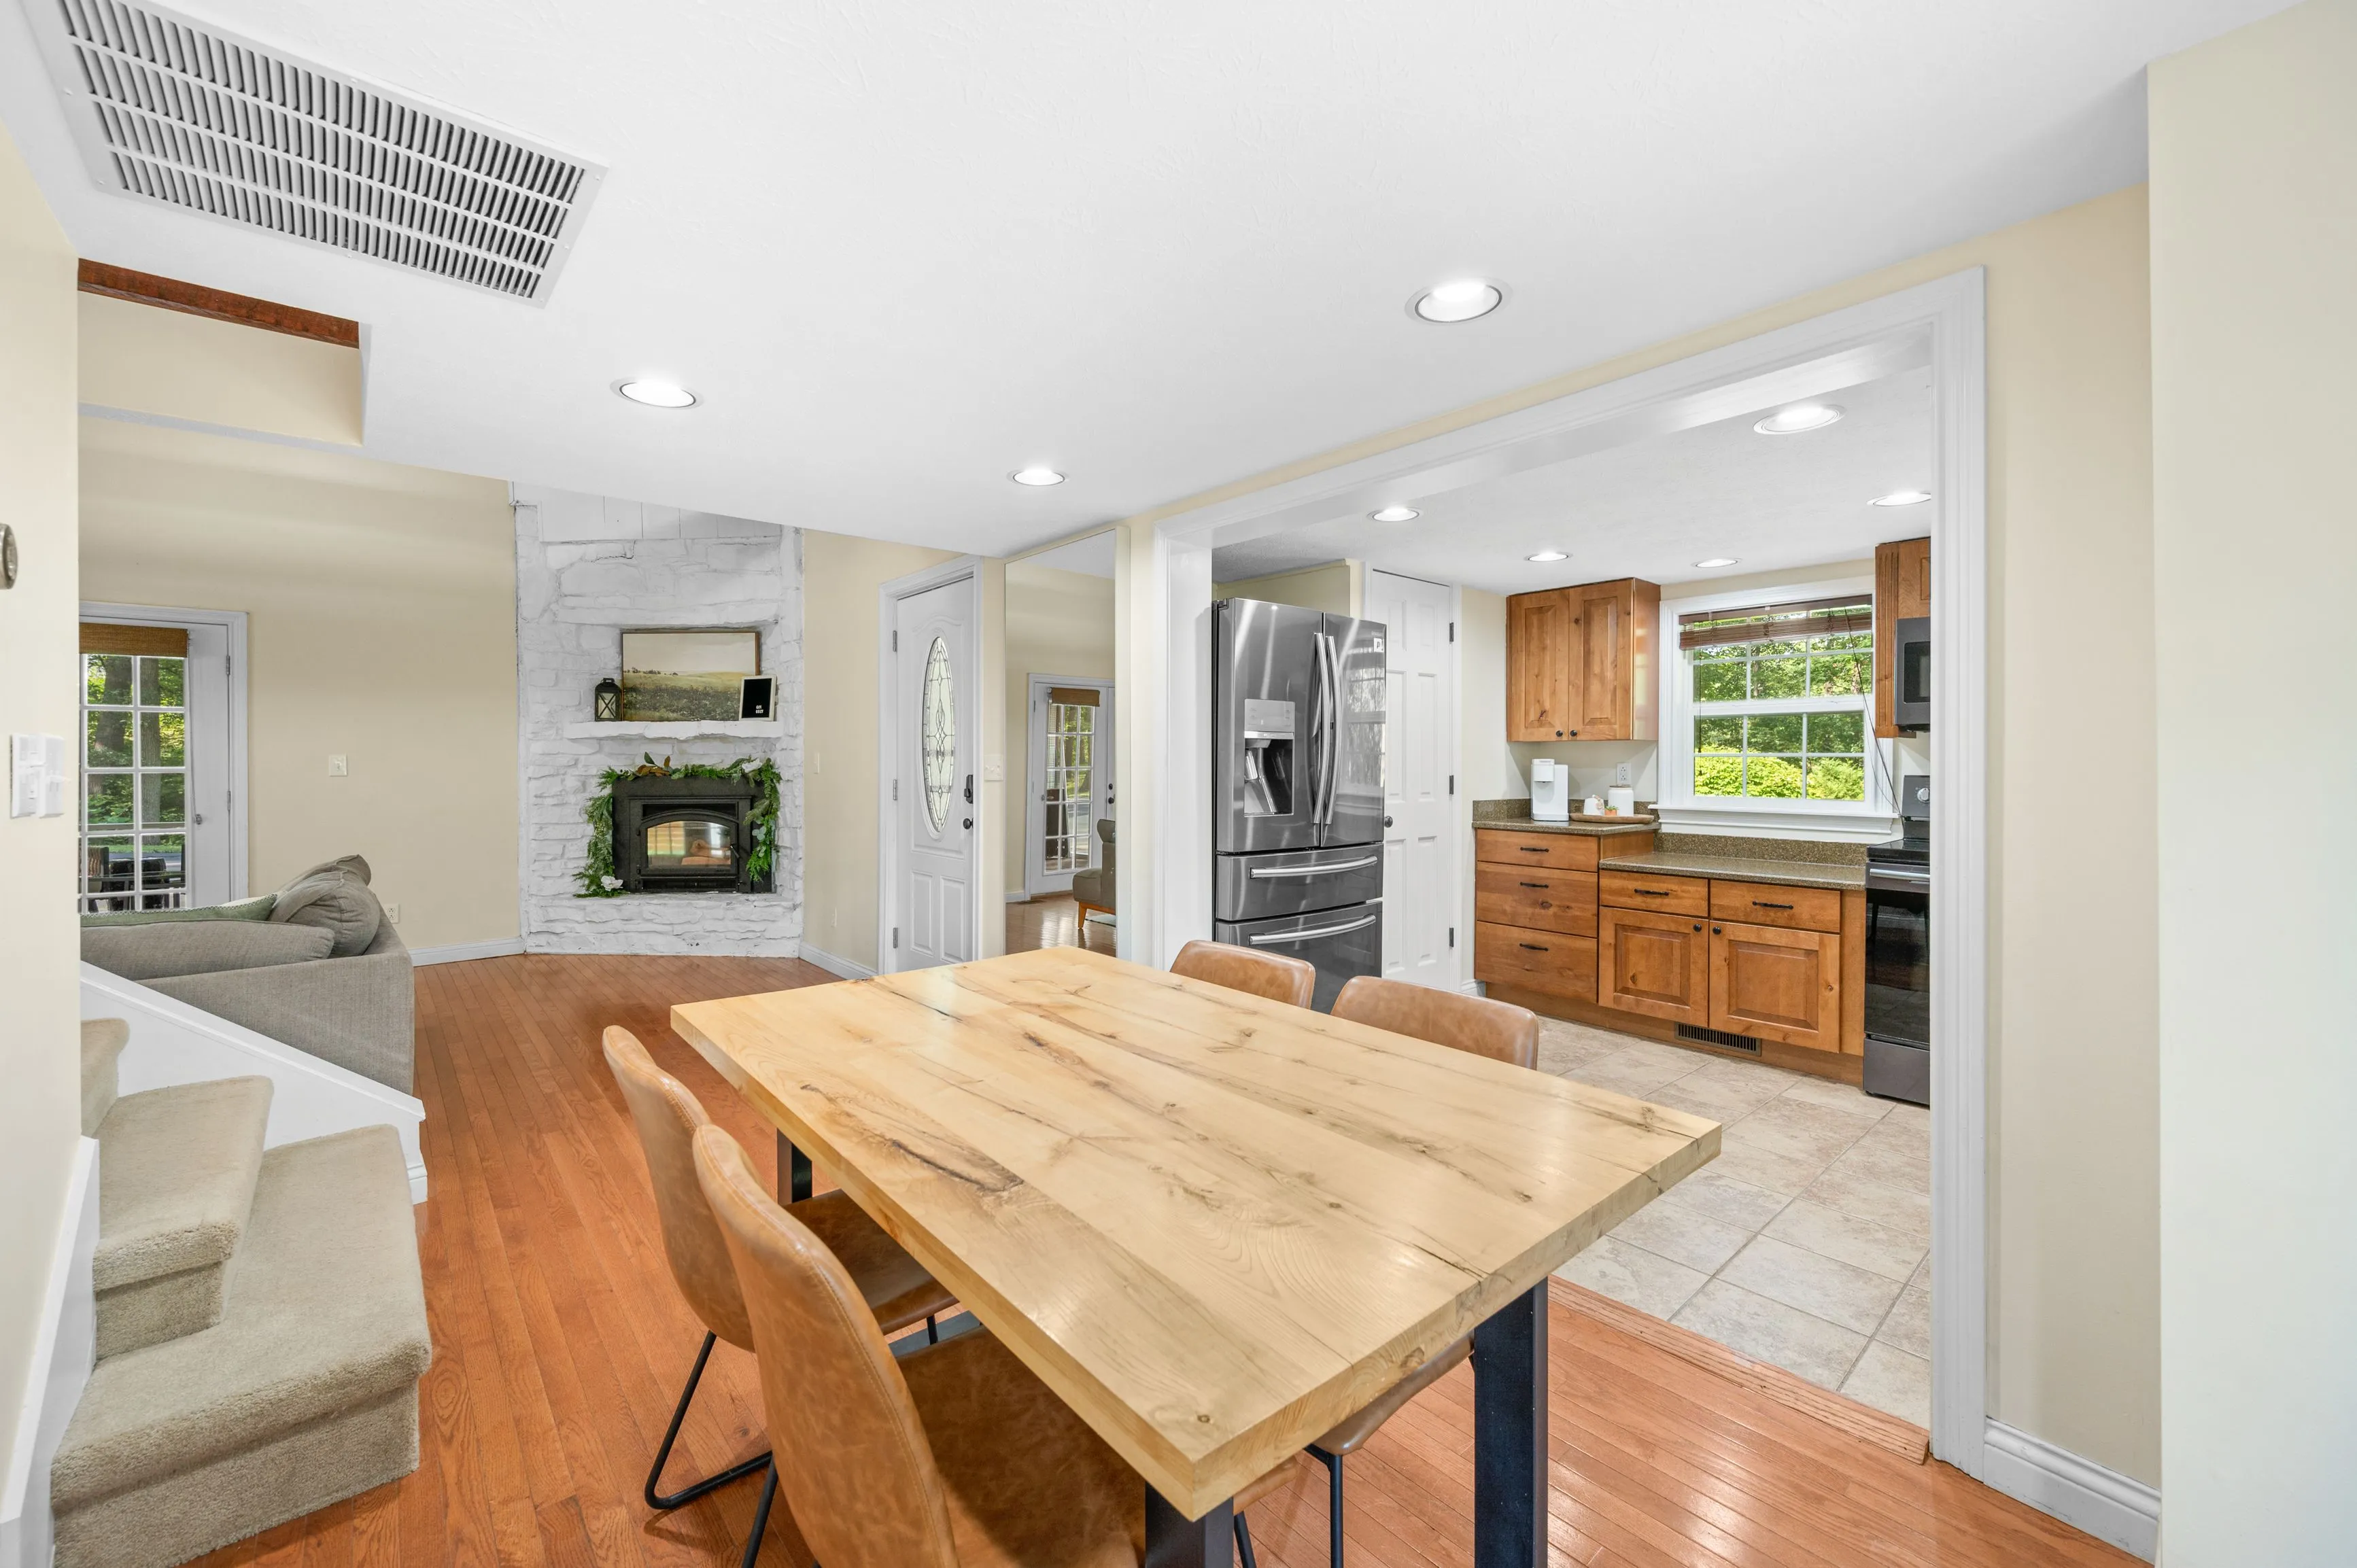 Bright open-plan kitchen and dining area with wooden table, hardwood floors, and white cabinetry.